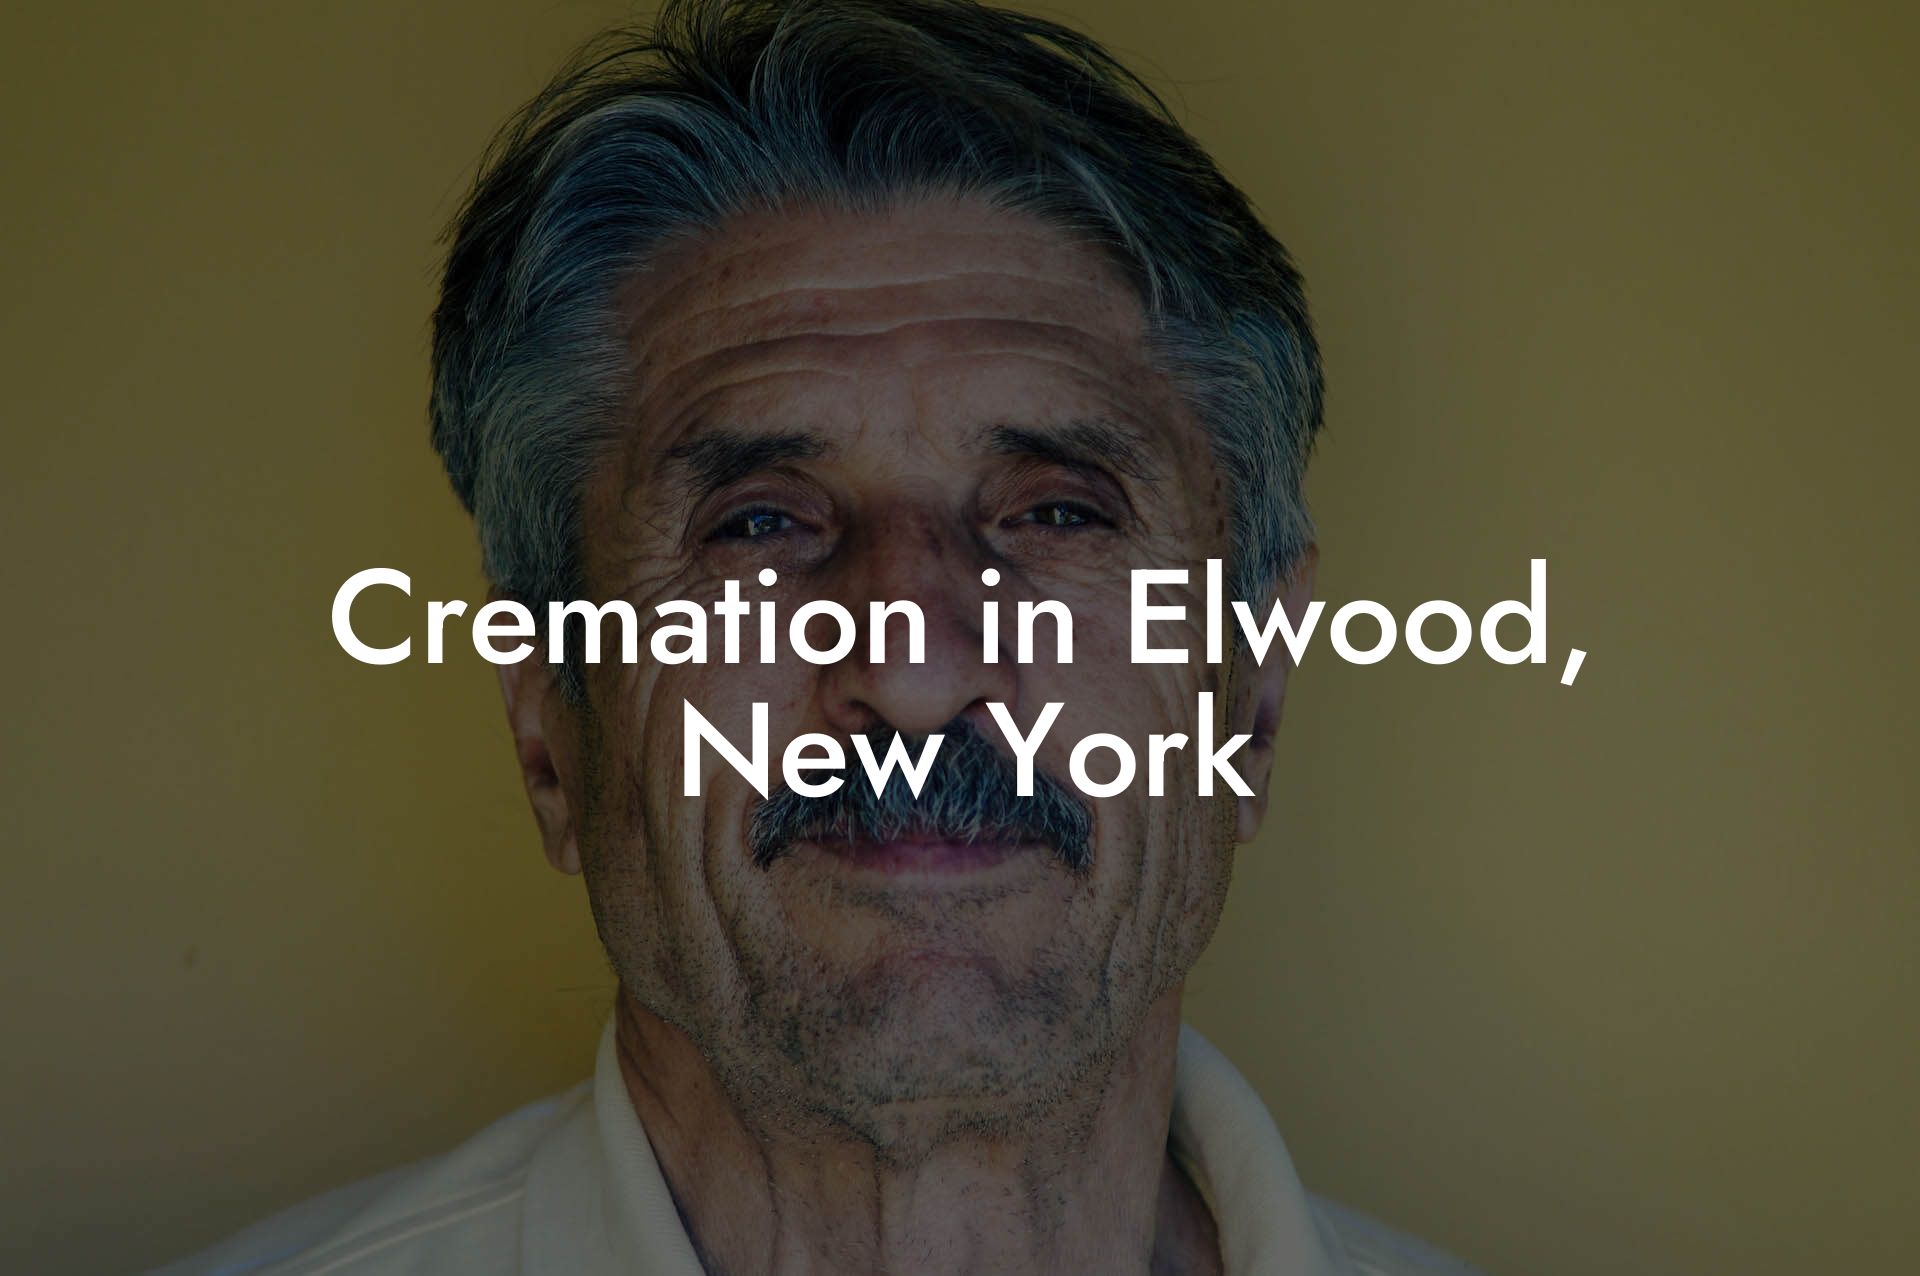 Cremation in Elwood, New York